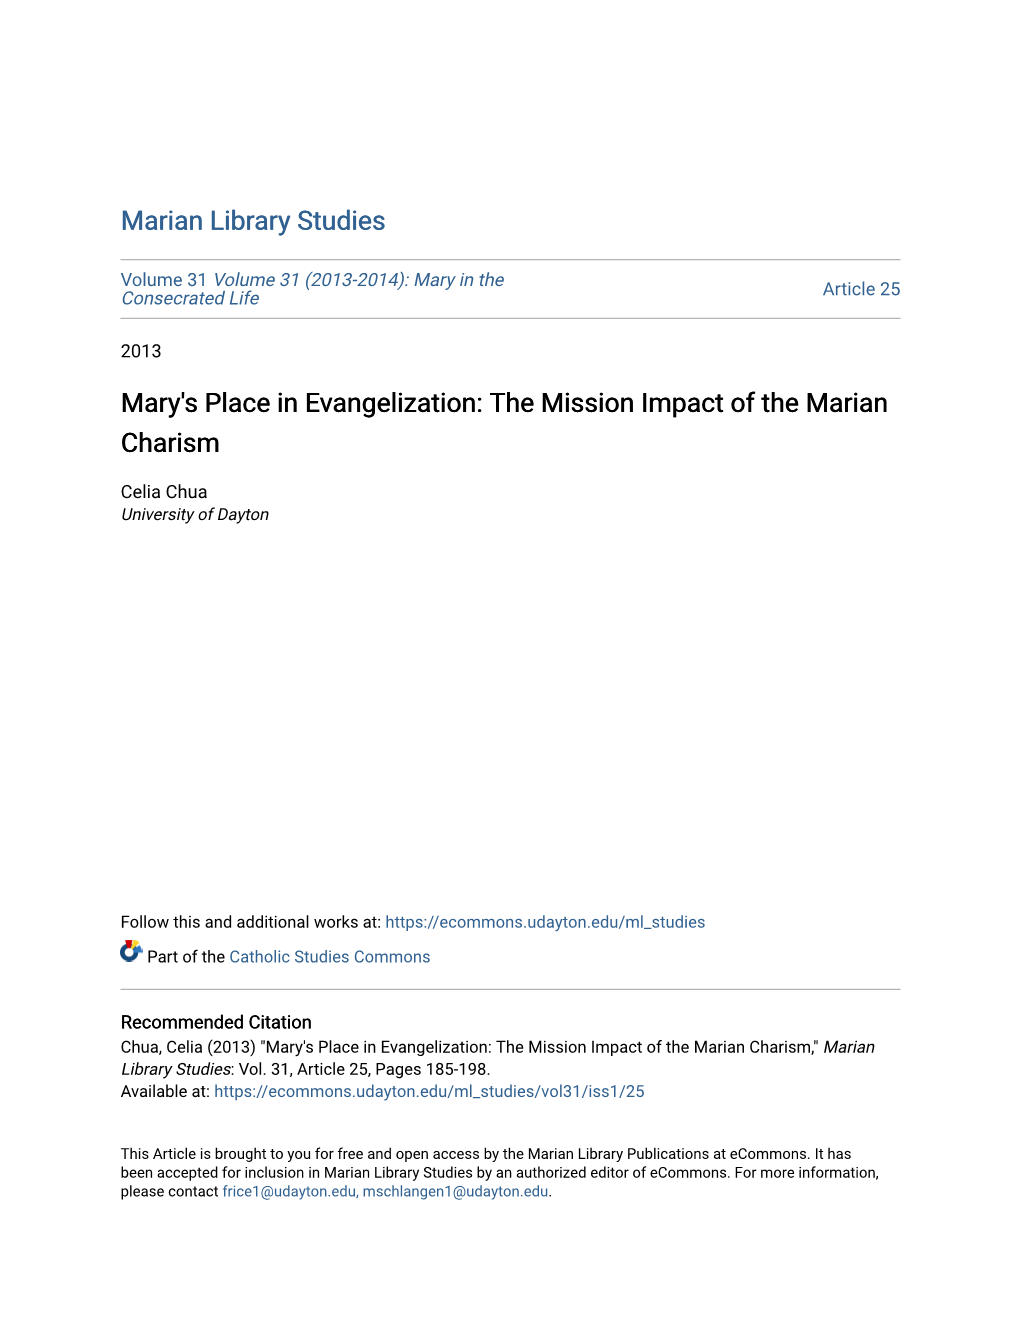 Mary's Place in Evangelization: the Mission Impact of the Marian Charism